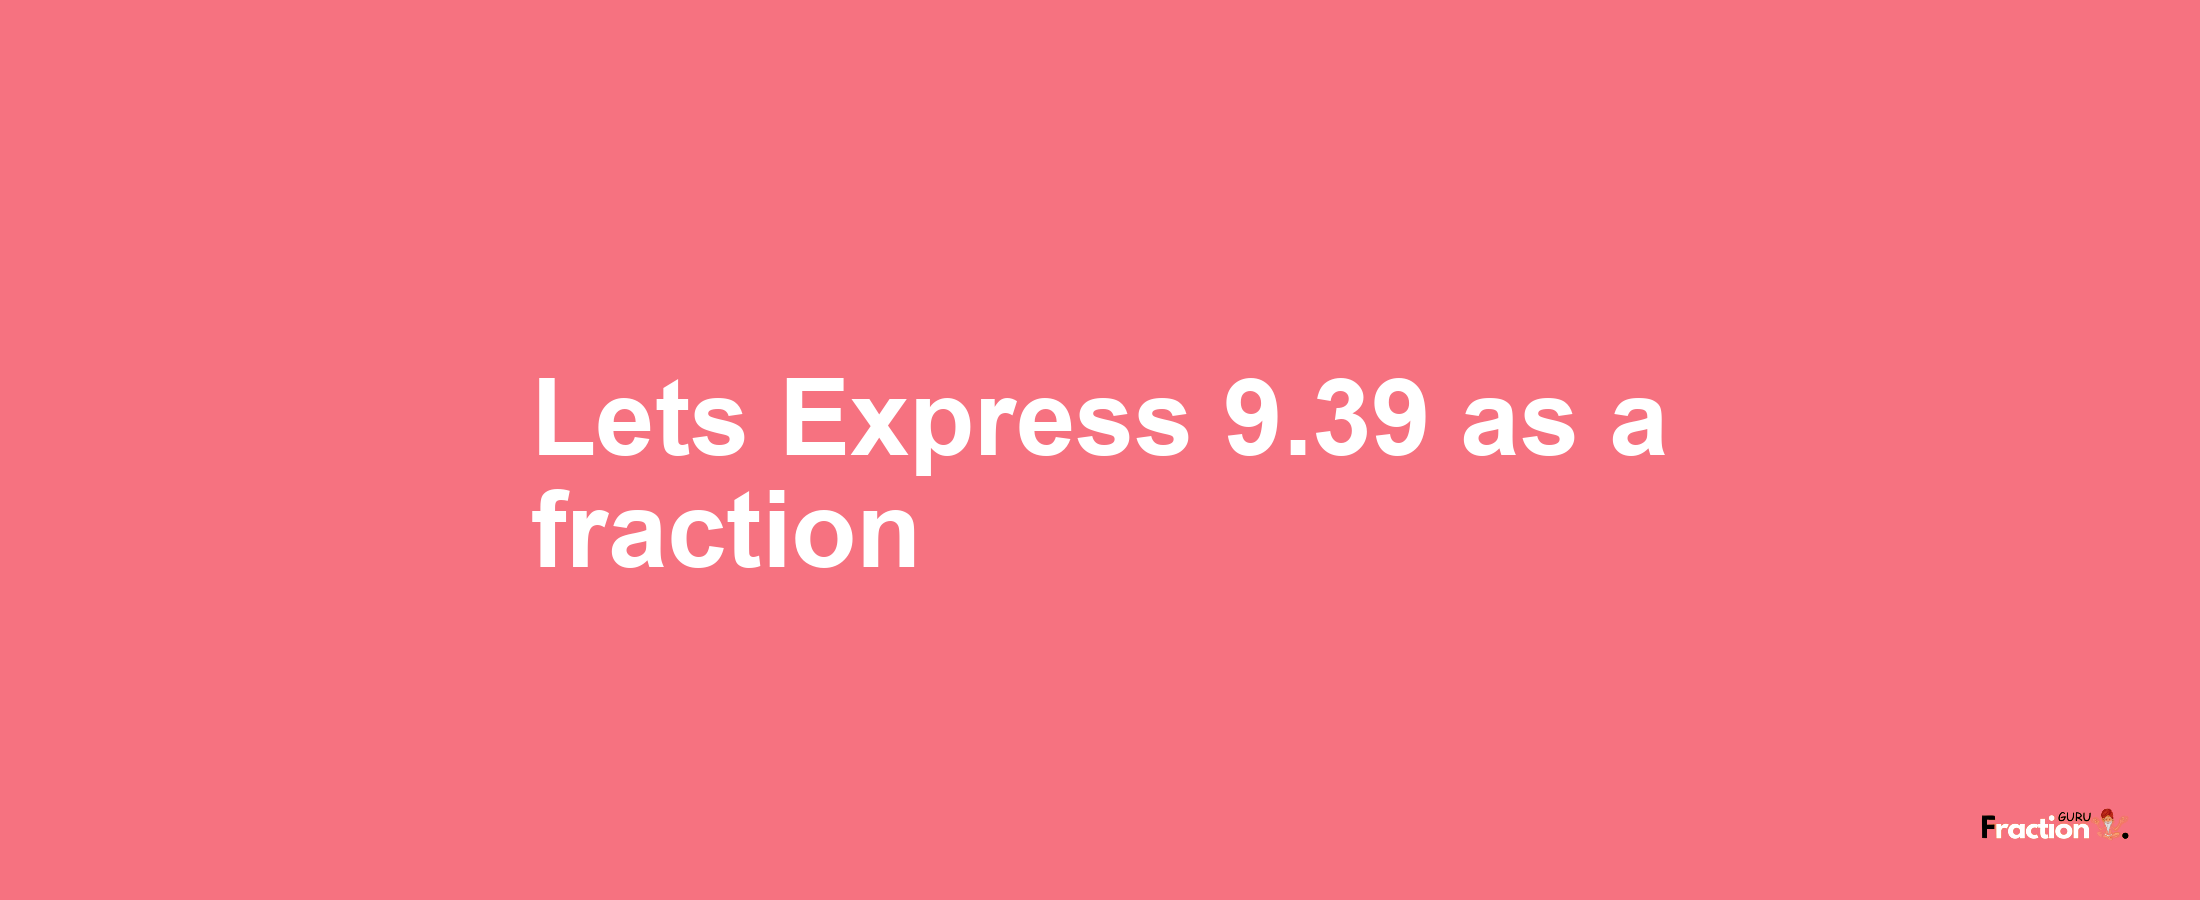 Lets Express 9.39 as afraction